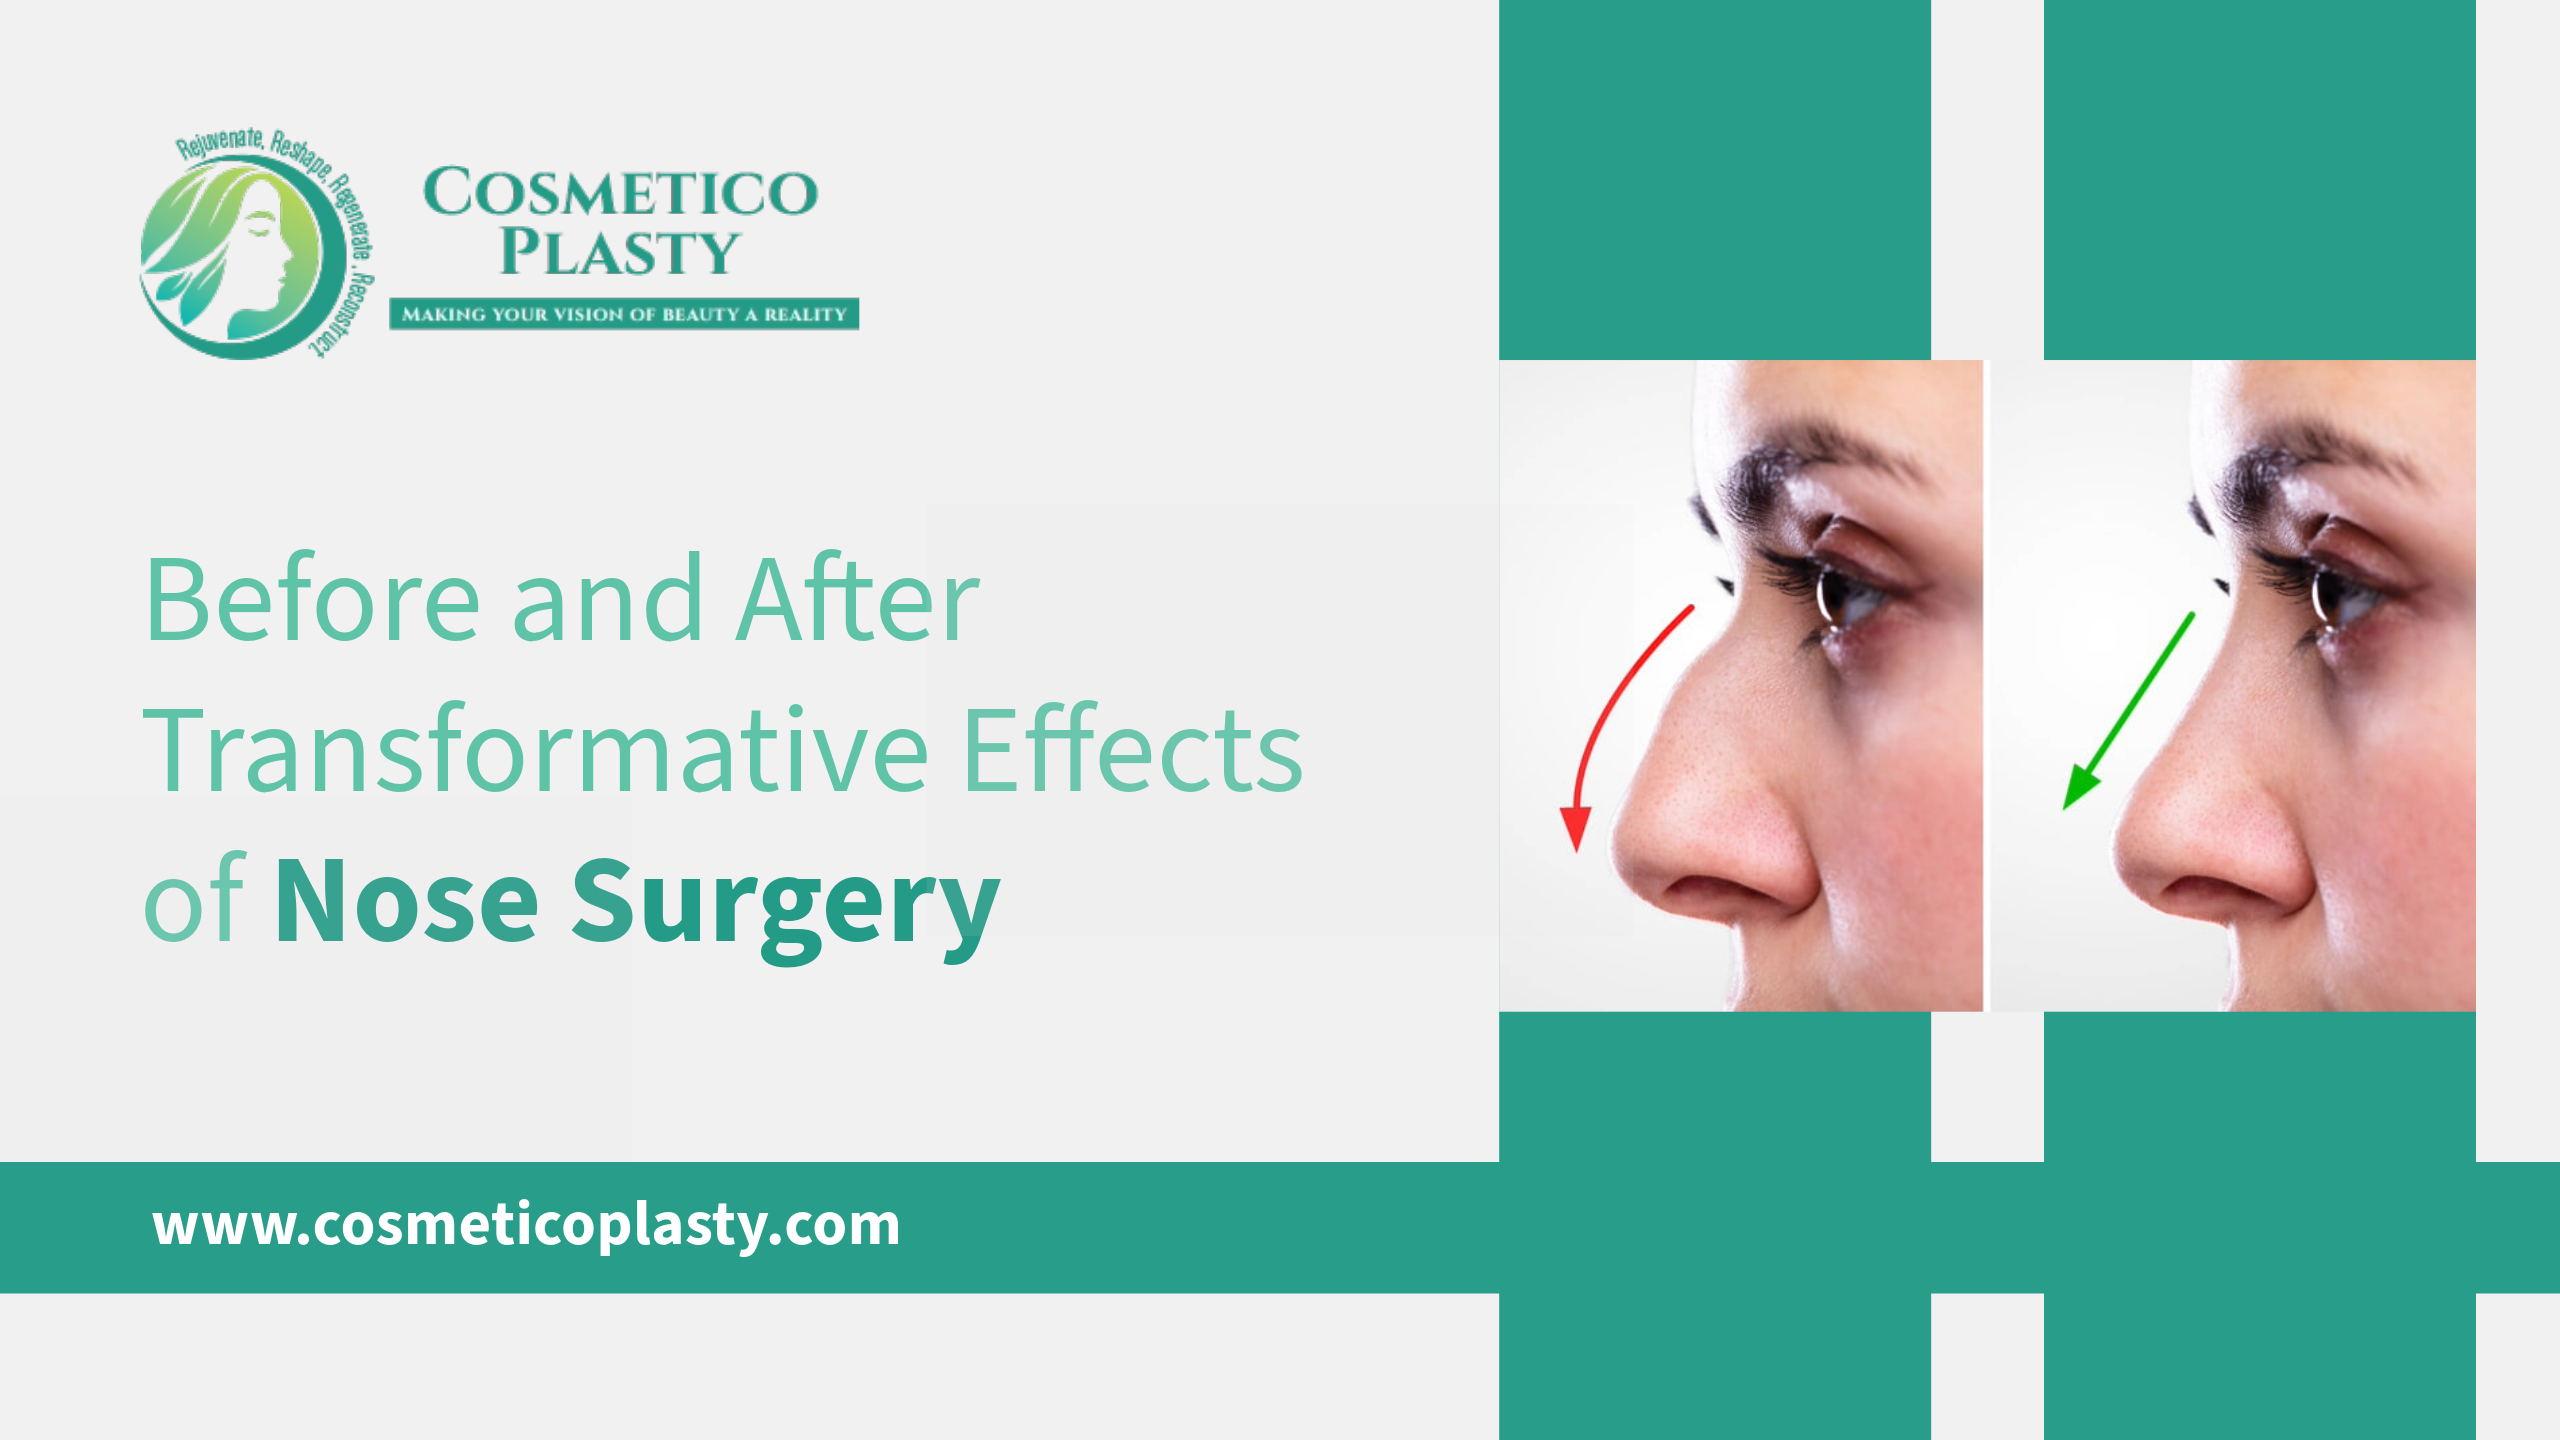 Before and After Transformative Effects of Nose Surgery